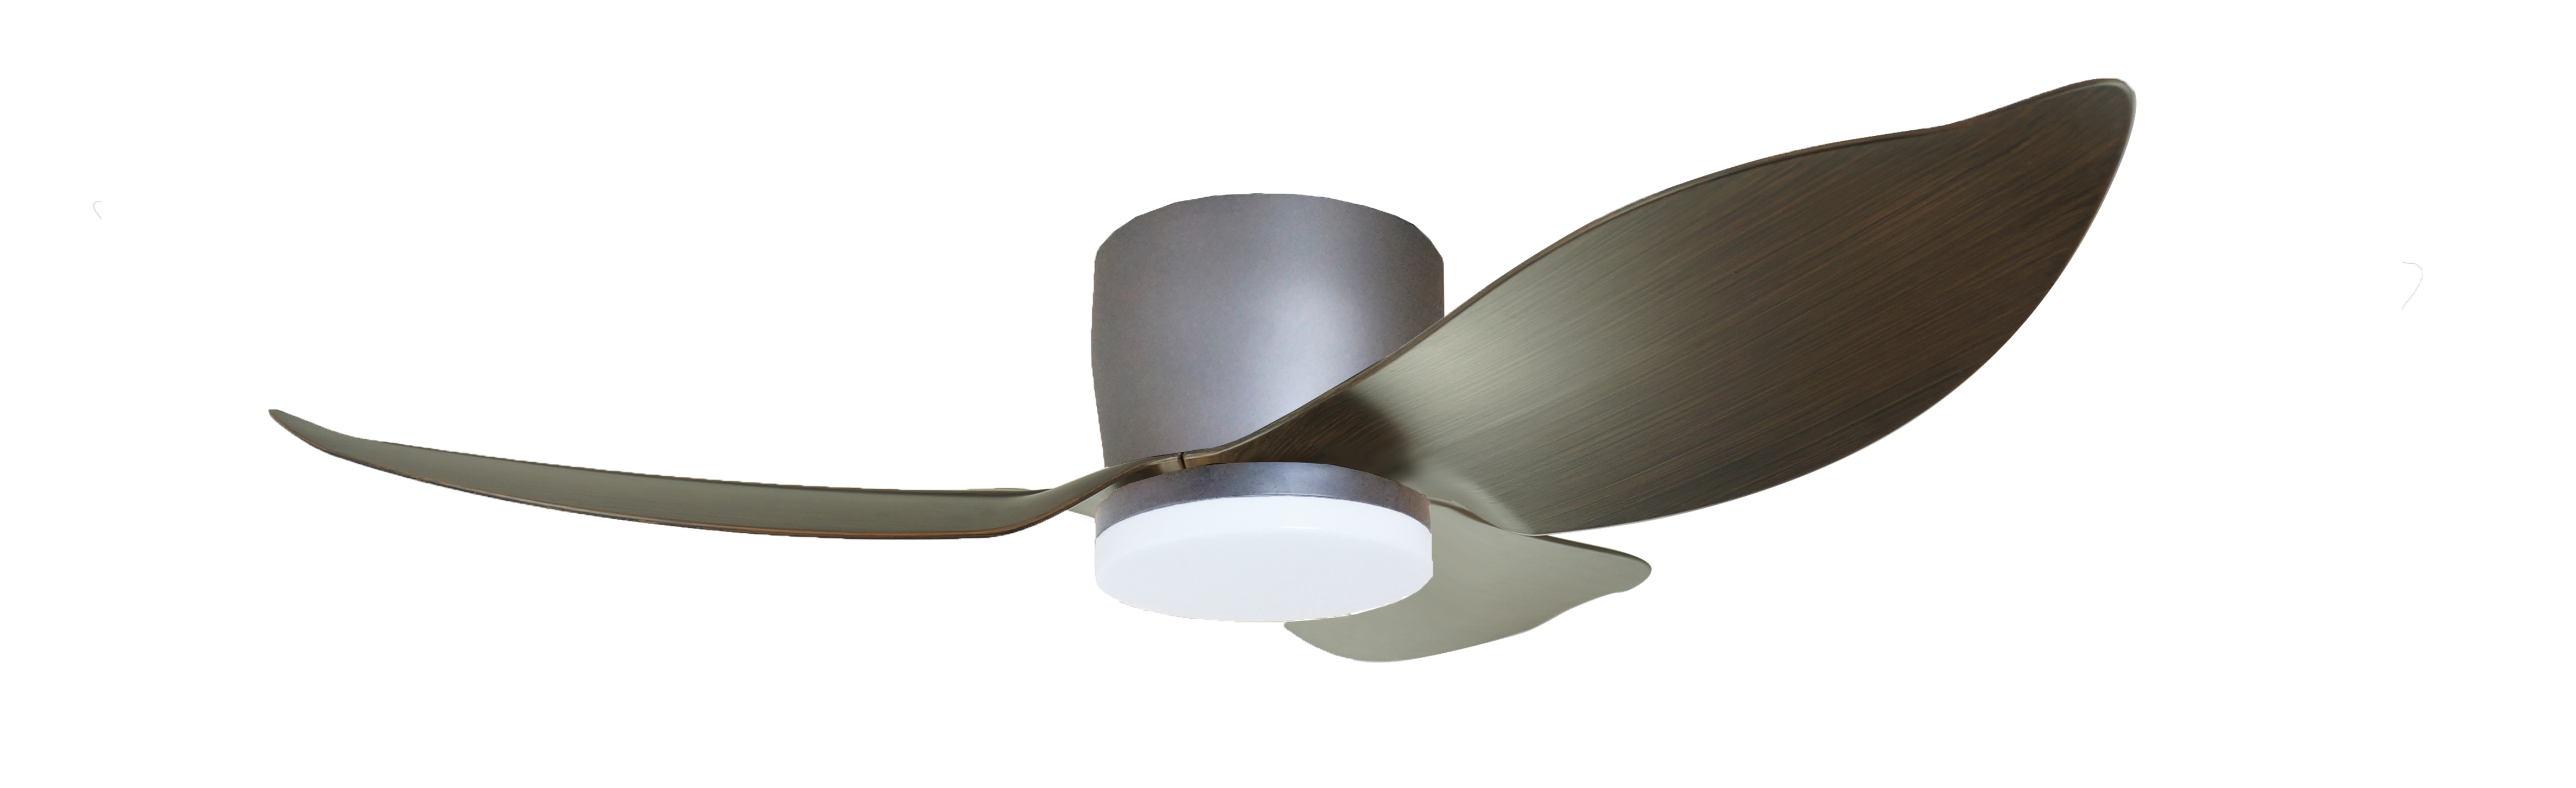 Enjoy Gentle Breezes And Ambient Lighting with This 46-inch Nature-inspired Ceiling Fan